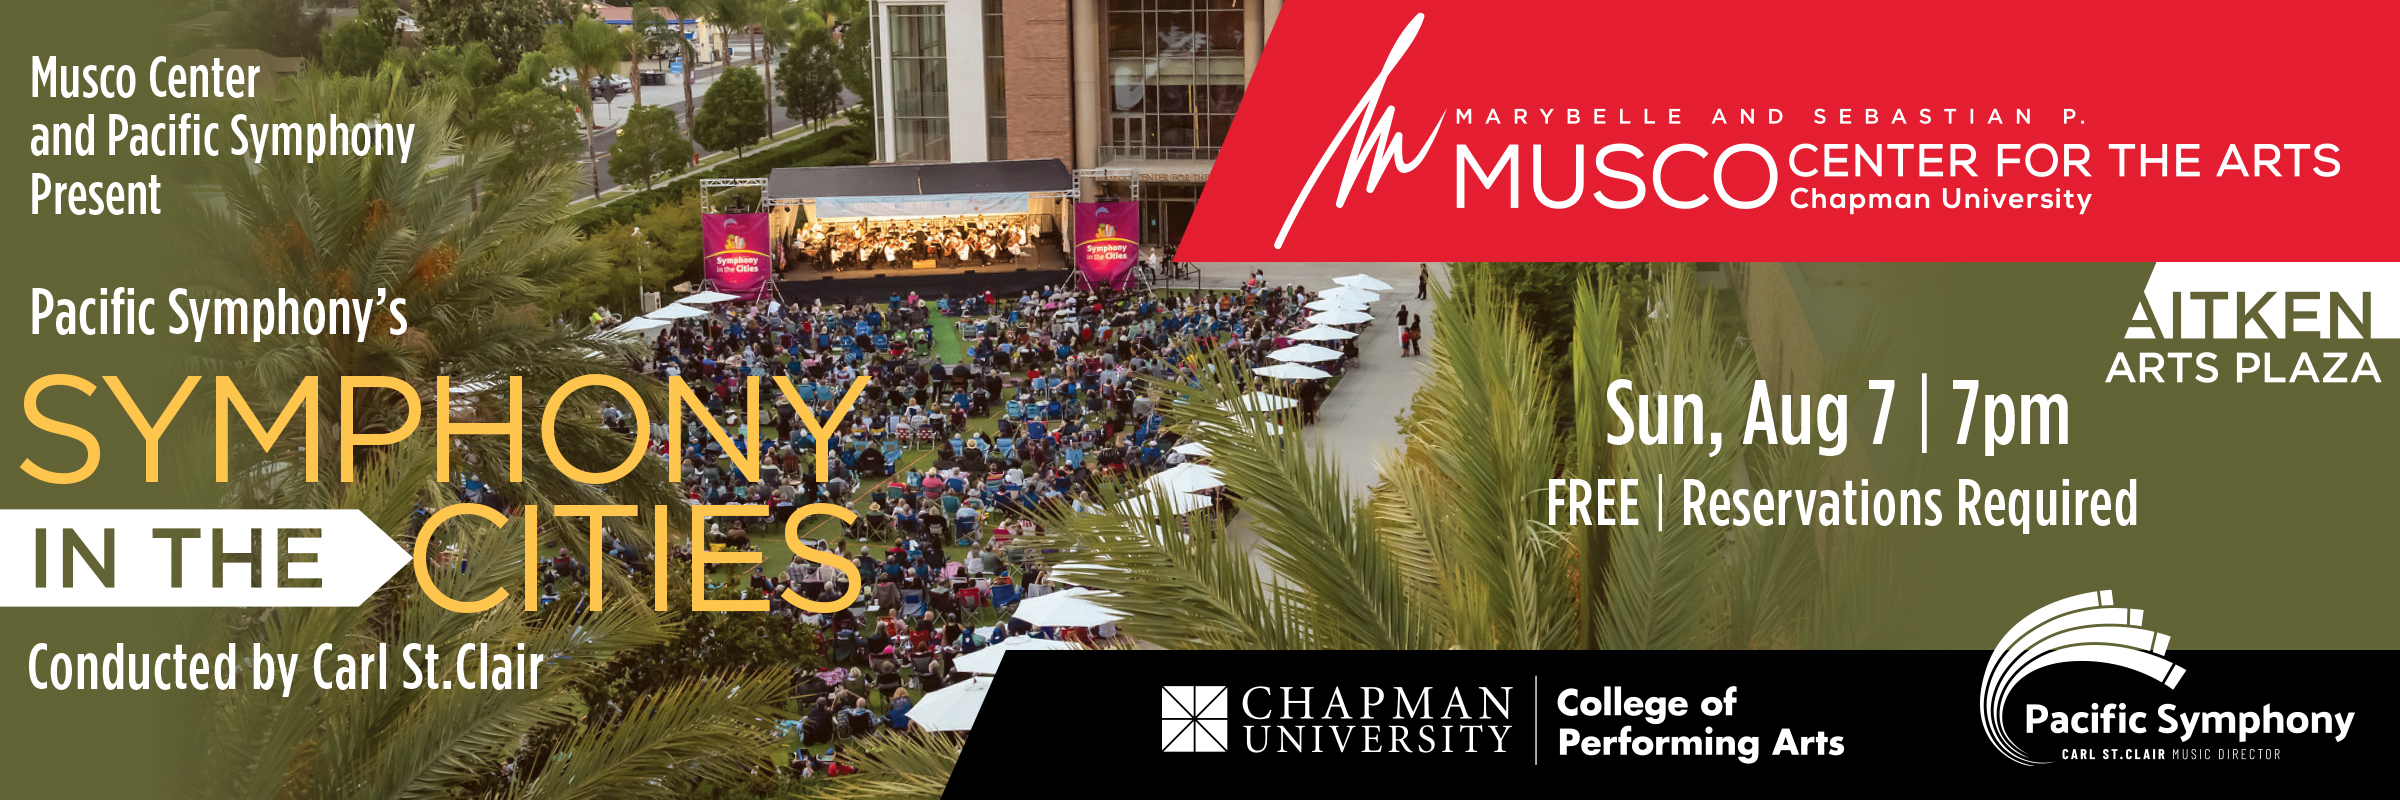 Marybelle and Sebastian P. Musco Center for the Arts, Chapman University. Musco Center and Pacific Symphony Present Pacific Symphony's Symphony in the Cities Conducted by Carl St. Clair. Aitken Arts Plaza. Sun, Aug 7, 7pm. Free, Reservations Required. College of Performing Arts. High angle photo of the Aitken Arts Plaza filled with people in lawn chairs in front of an outdoor stage, in which the Pacific Symphony performs.